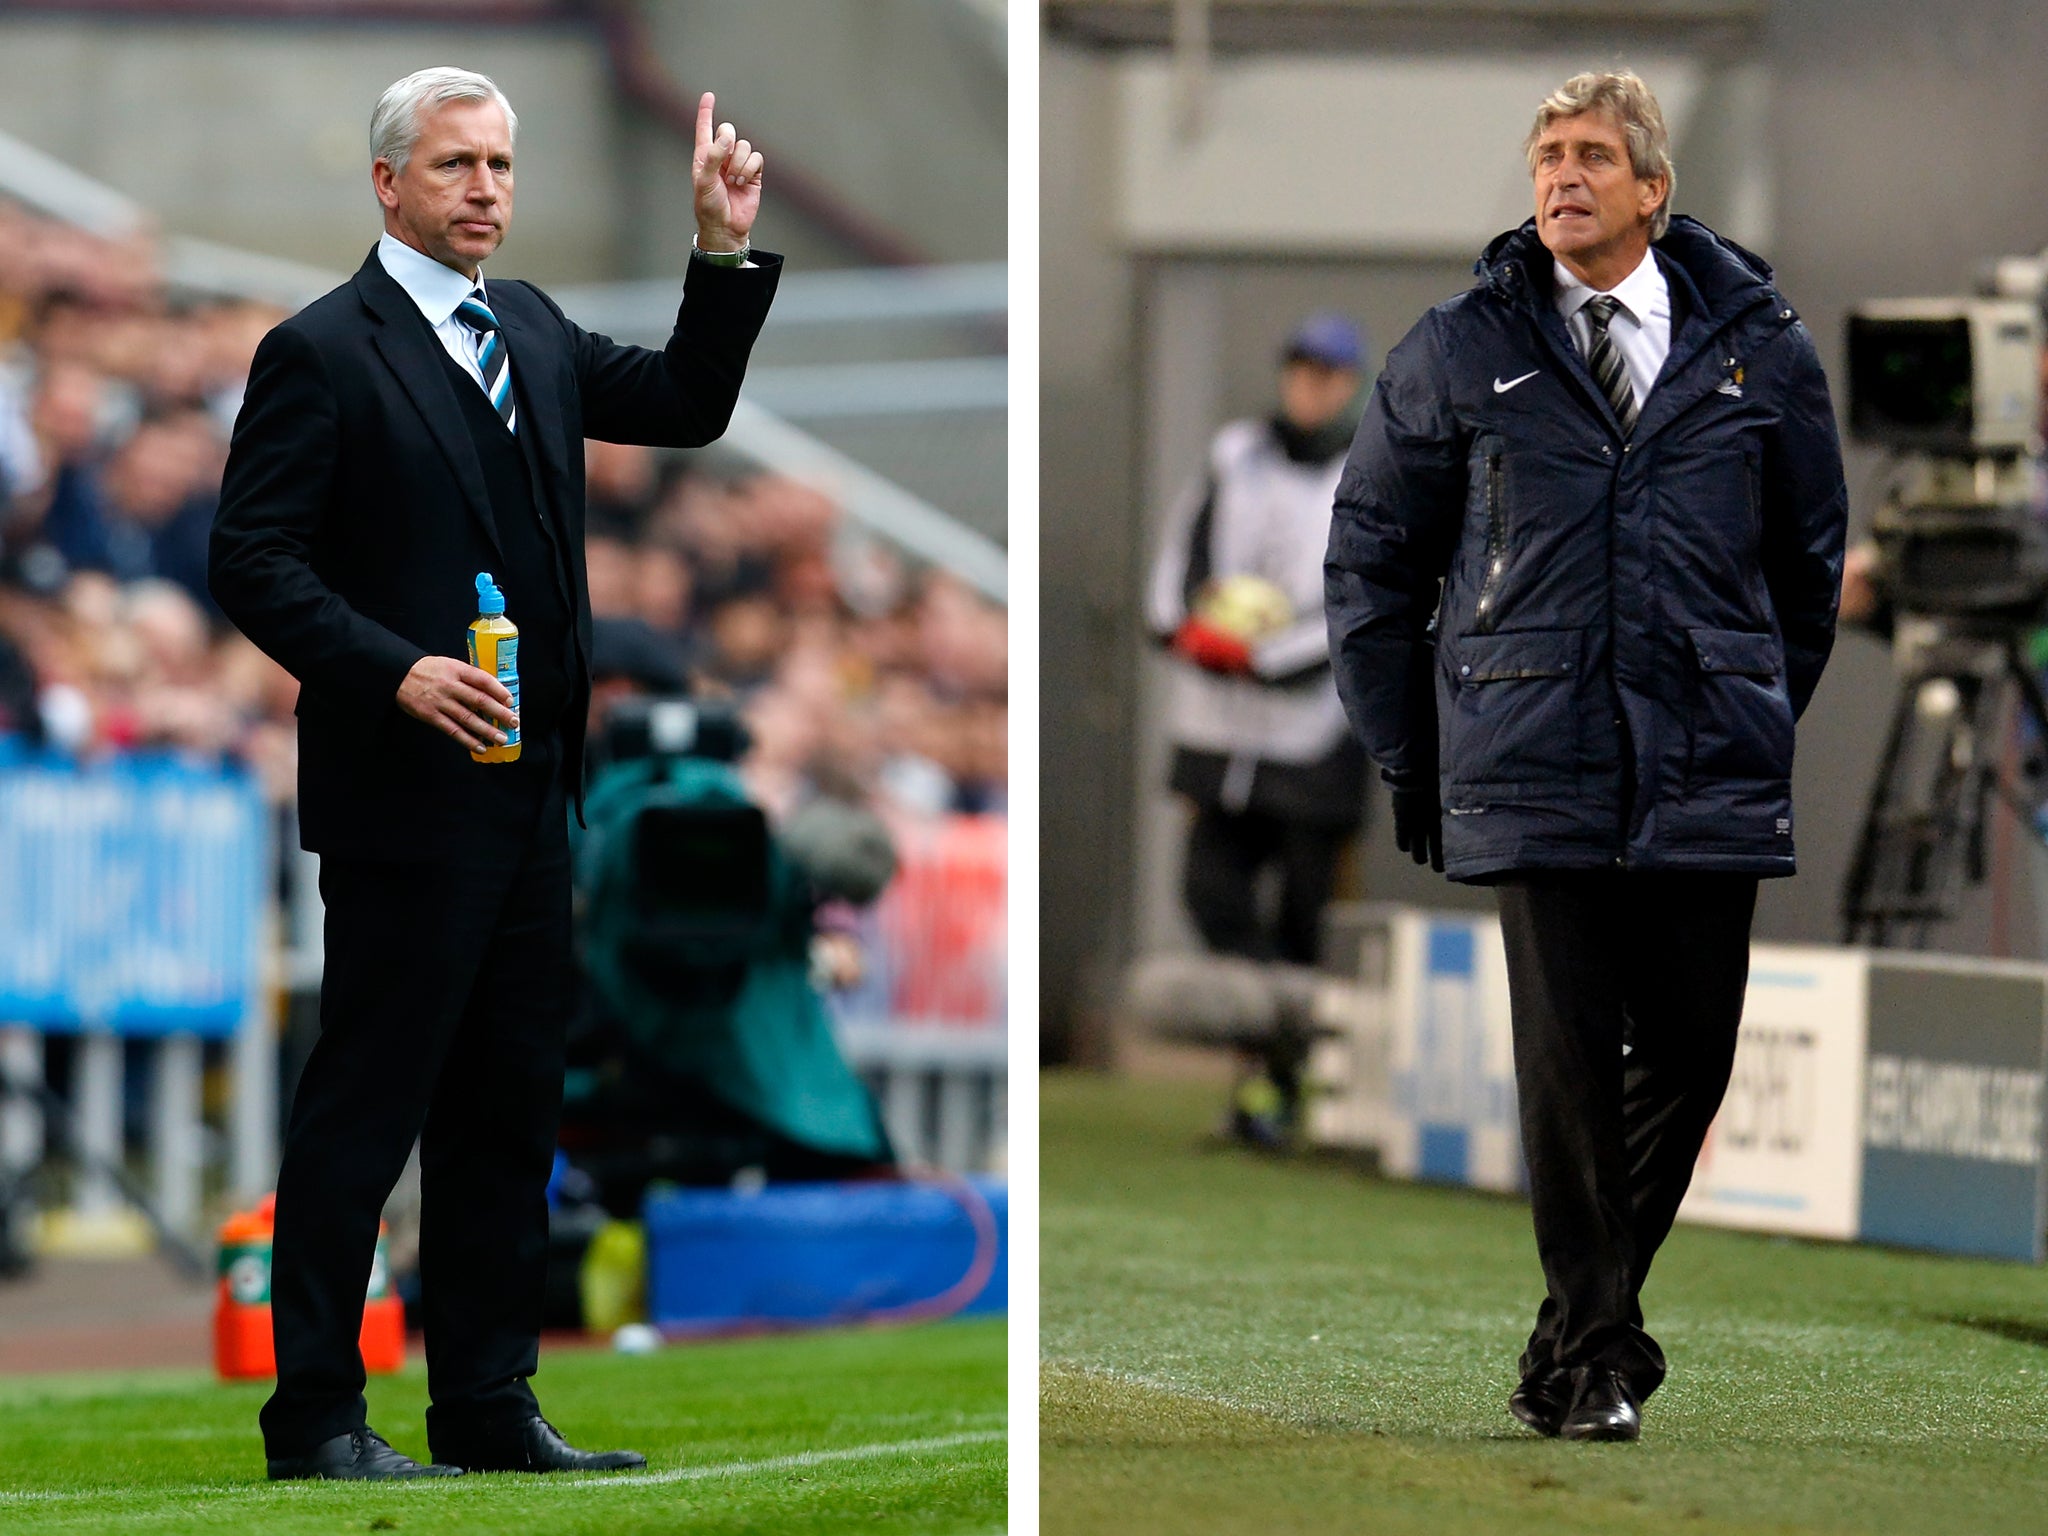 Newcastle manager Alan Pardew and Manchester City's Manuel Pellegrini will go head-to-head in the League Cup